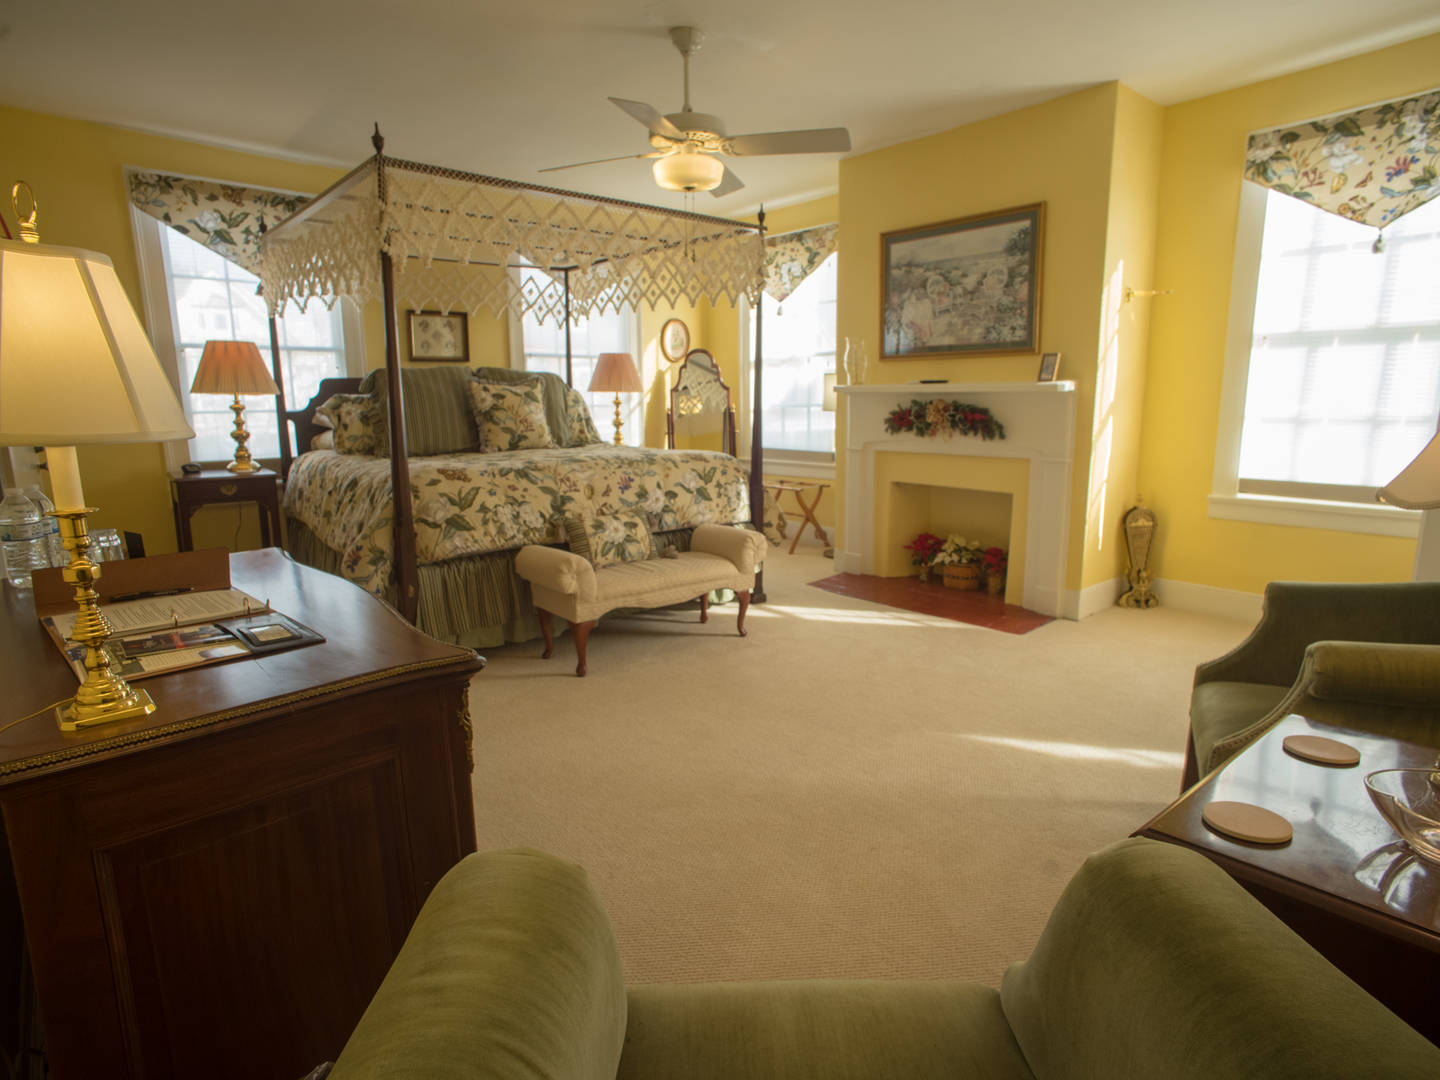 New Bern Bed and Breakfast